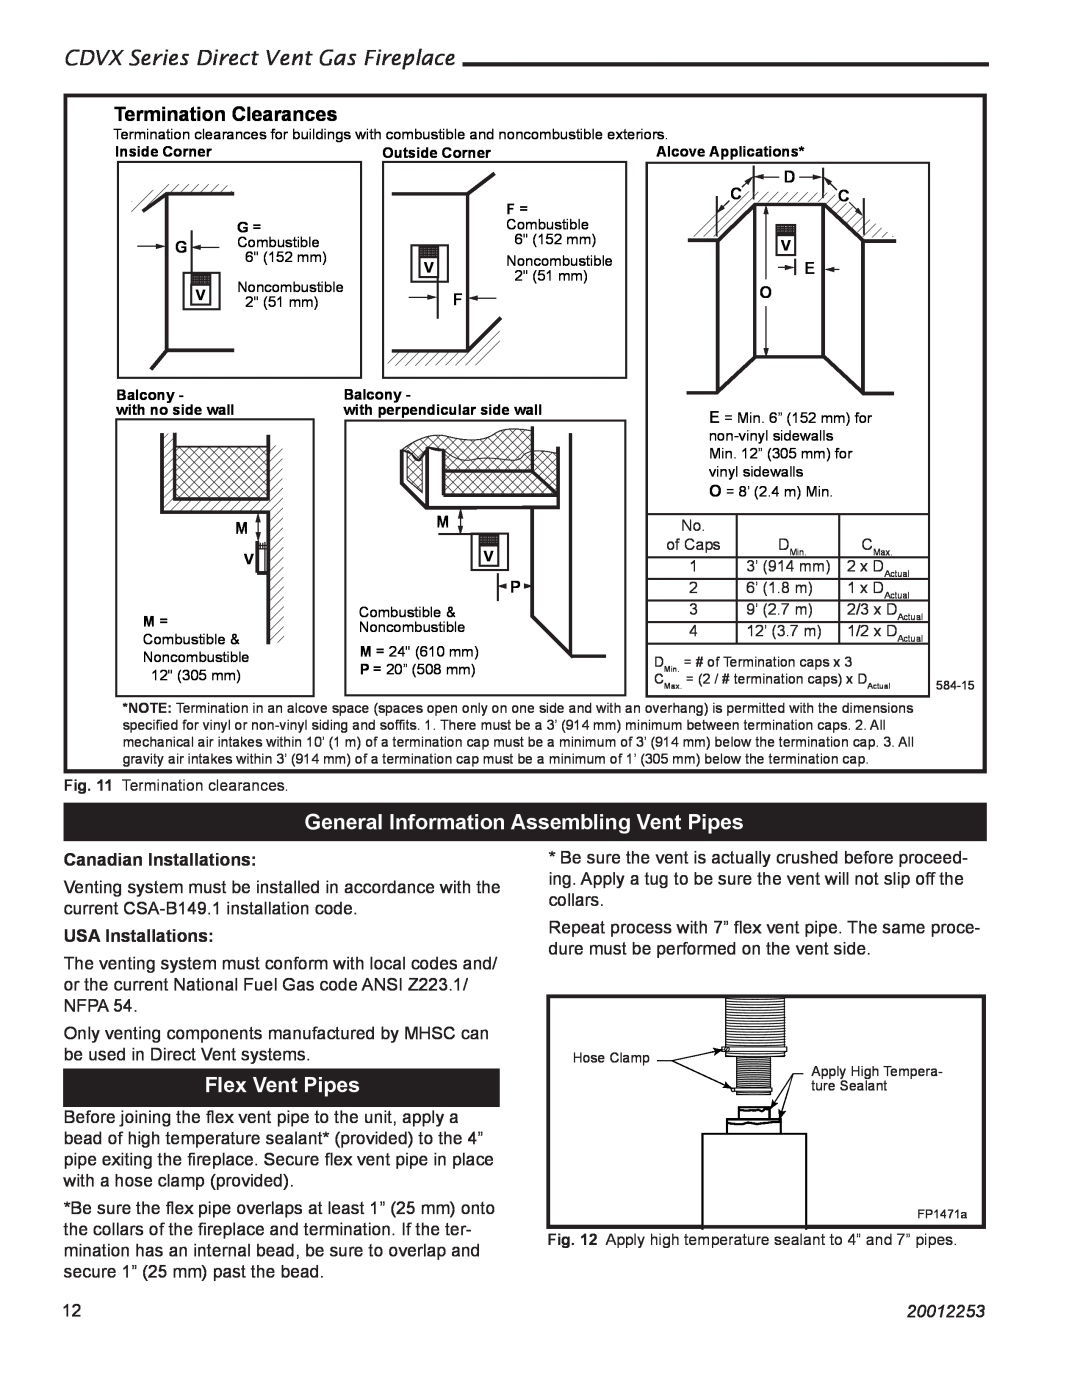 Monessen Hearth 36CDVXTRN General Information Assembling Vent Pipes, Flex Vent Pipes, Termination Clearances, 20012253 